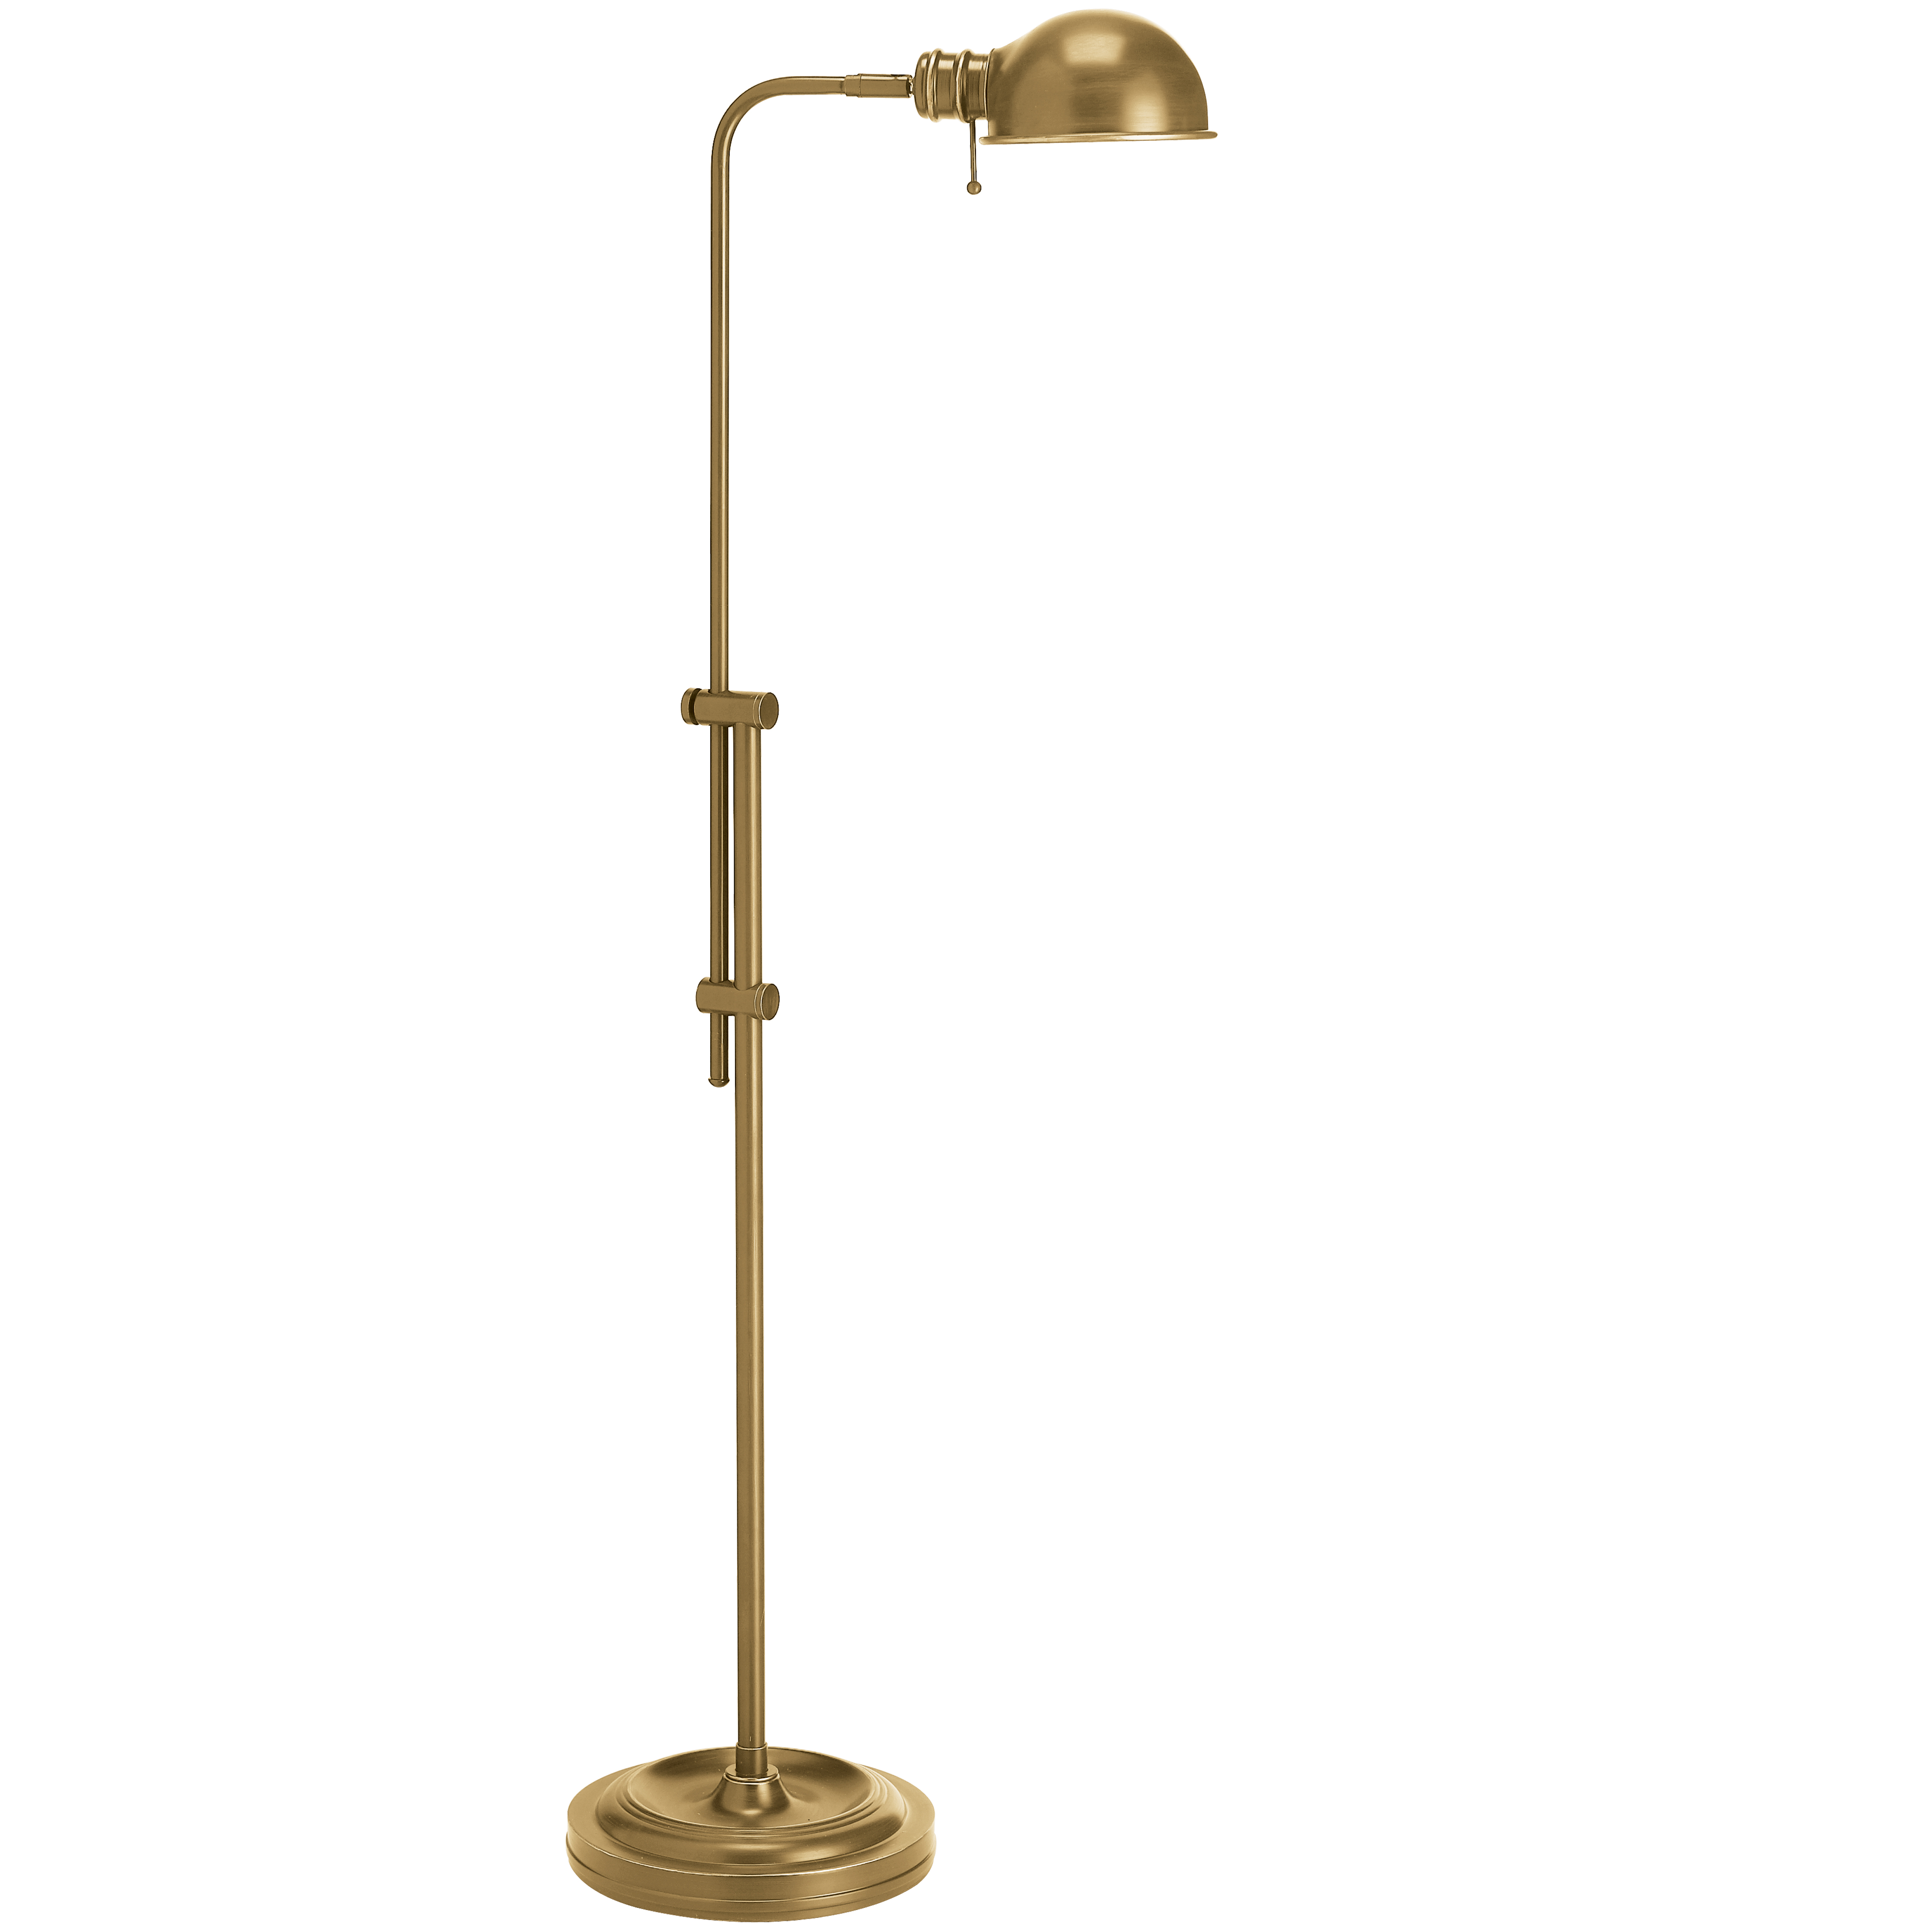 Like its namesake, the Fedora family of lighting pays tribute to traditional forms and designs. The classic pharmacy floor lamp is crafted with efficient modern detail. The metal base and frame are adjustable in height, with a round lamp head, and a pull chain to turn it on. It comes in your choice of finishes to adapt to any traditional décor scheme. Fedora lighting, with its blend of practical features and timeless style, will blend easily with the furnishings in a bedroom, living room or office space.